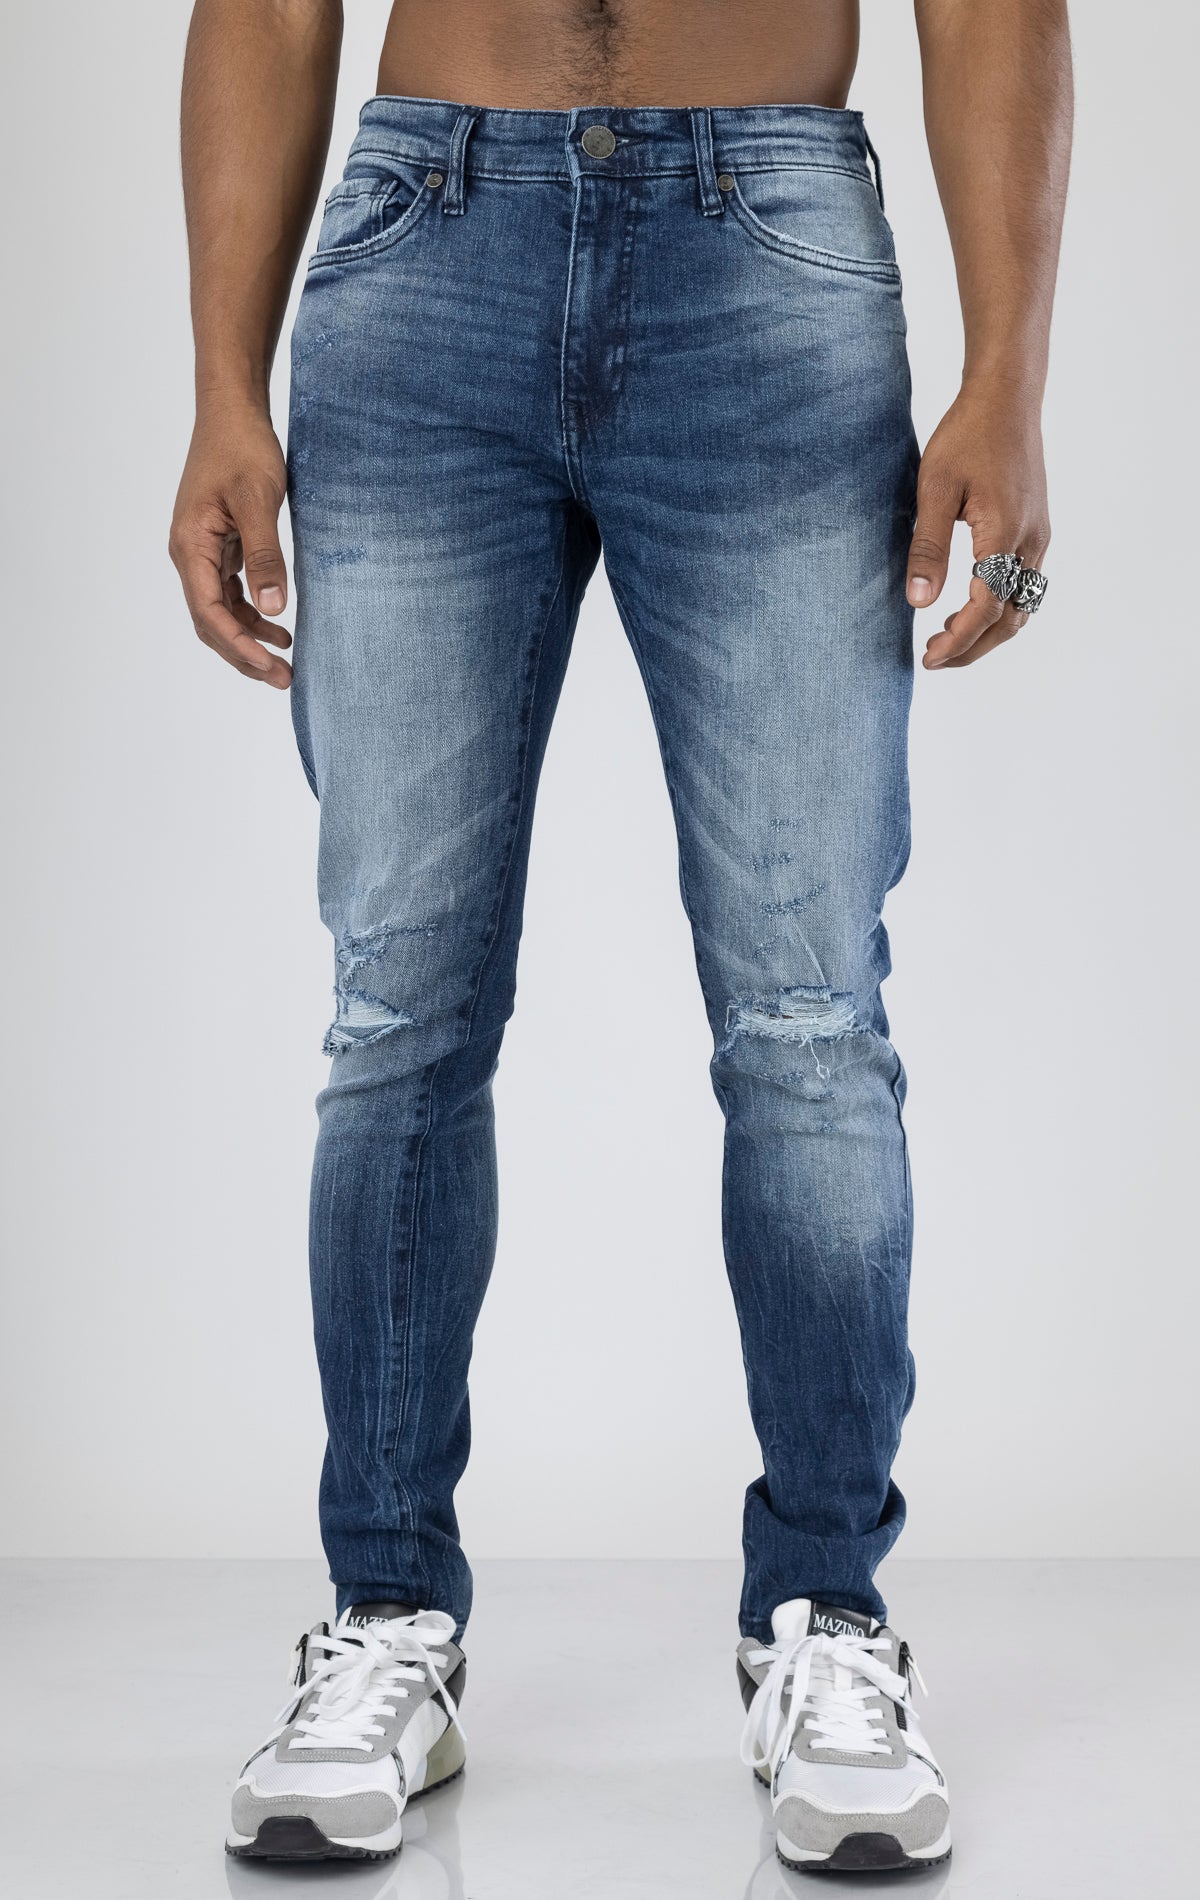 Men's ripped and distressed denim pants in a variety of washes. The pants feature a regular rise, tapered fit from the knee down, open rips at the knees, unique distressing details, and are made from 98% cotton with 2% lycra for stretch